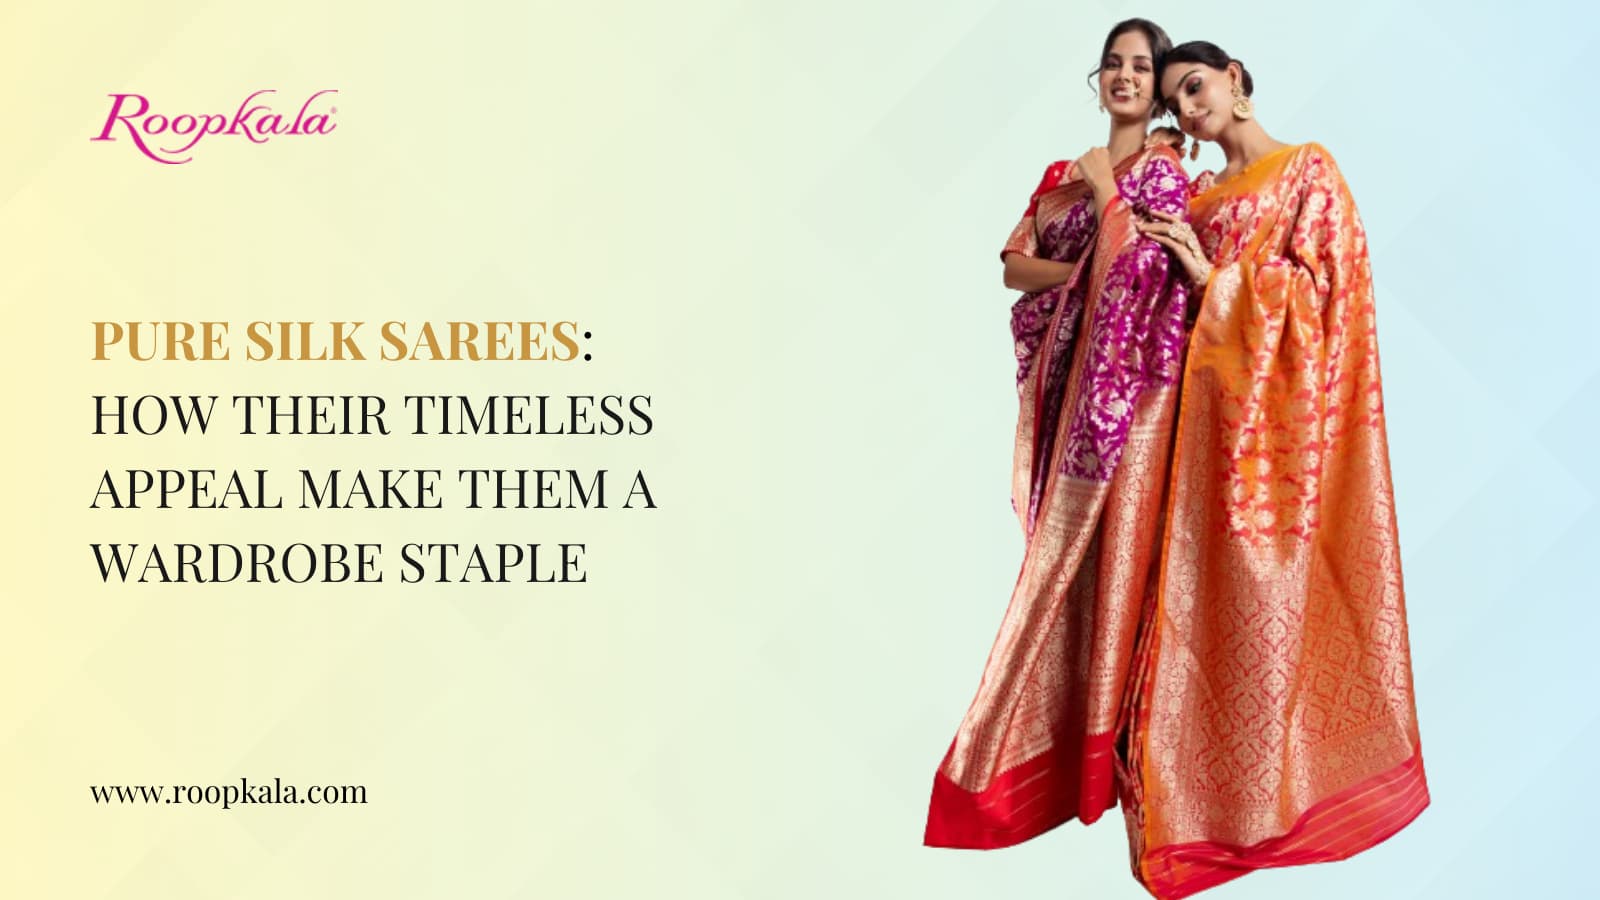 Pure Silk Sarees How Their Timeless Appeal Make Them a Wardrobe Staple